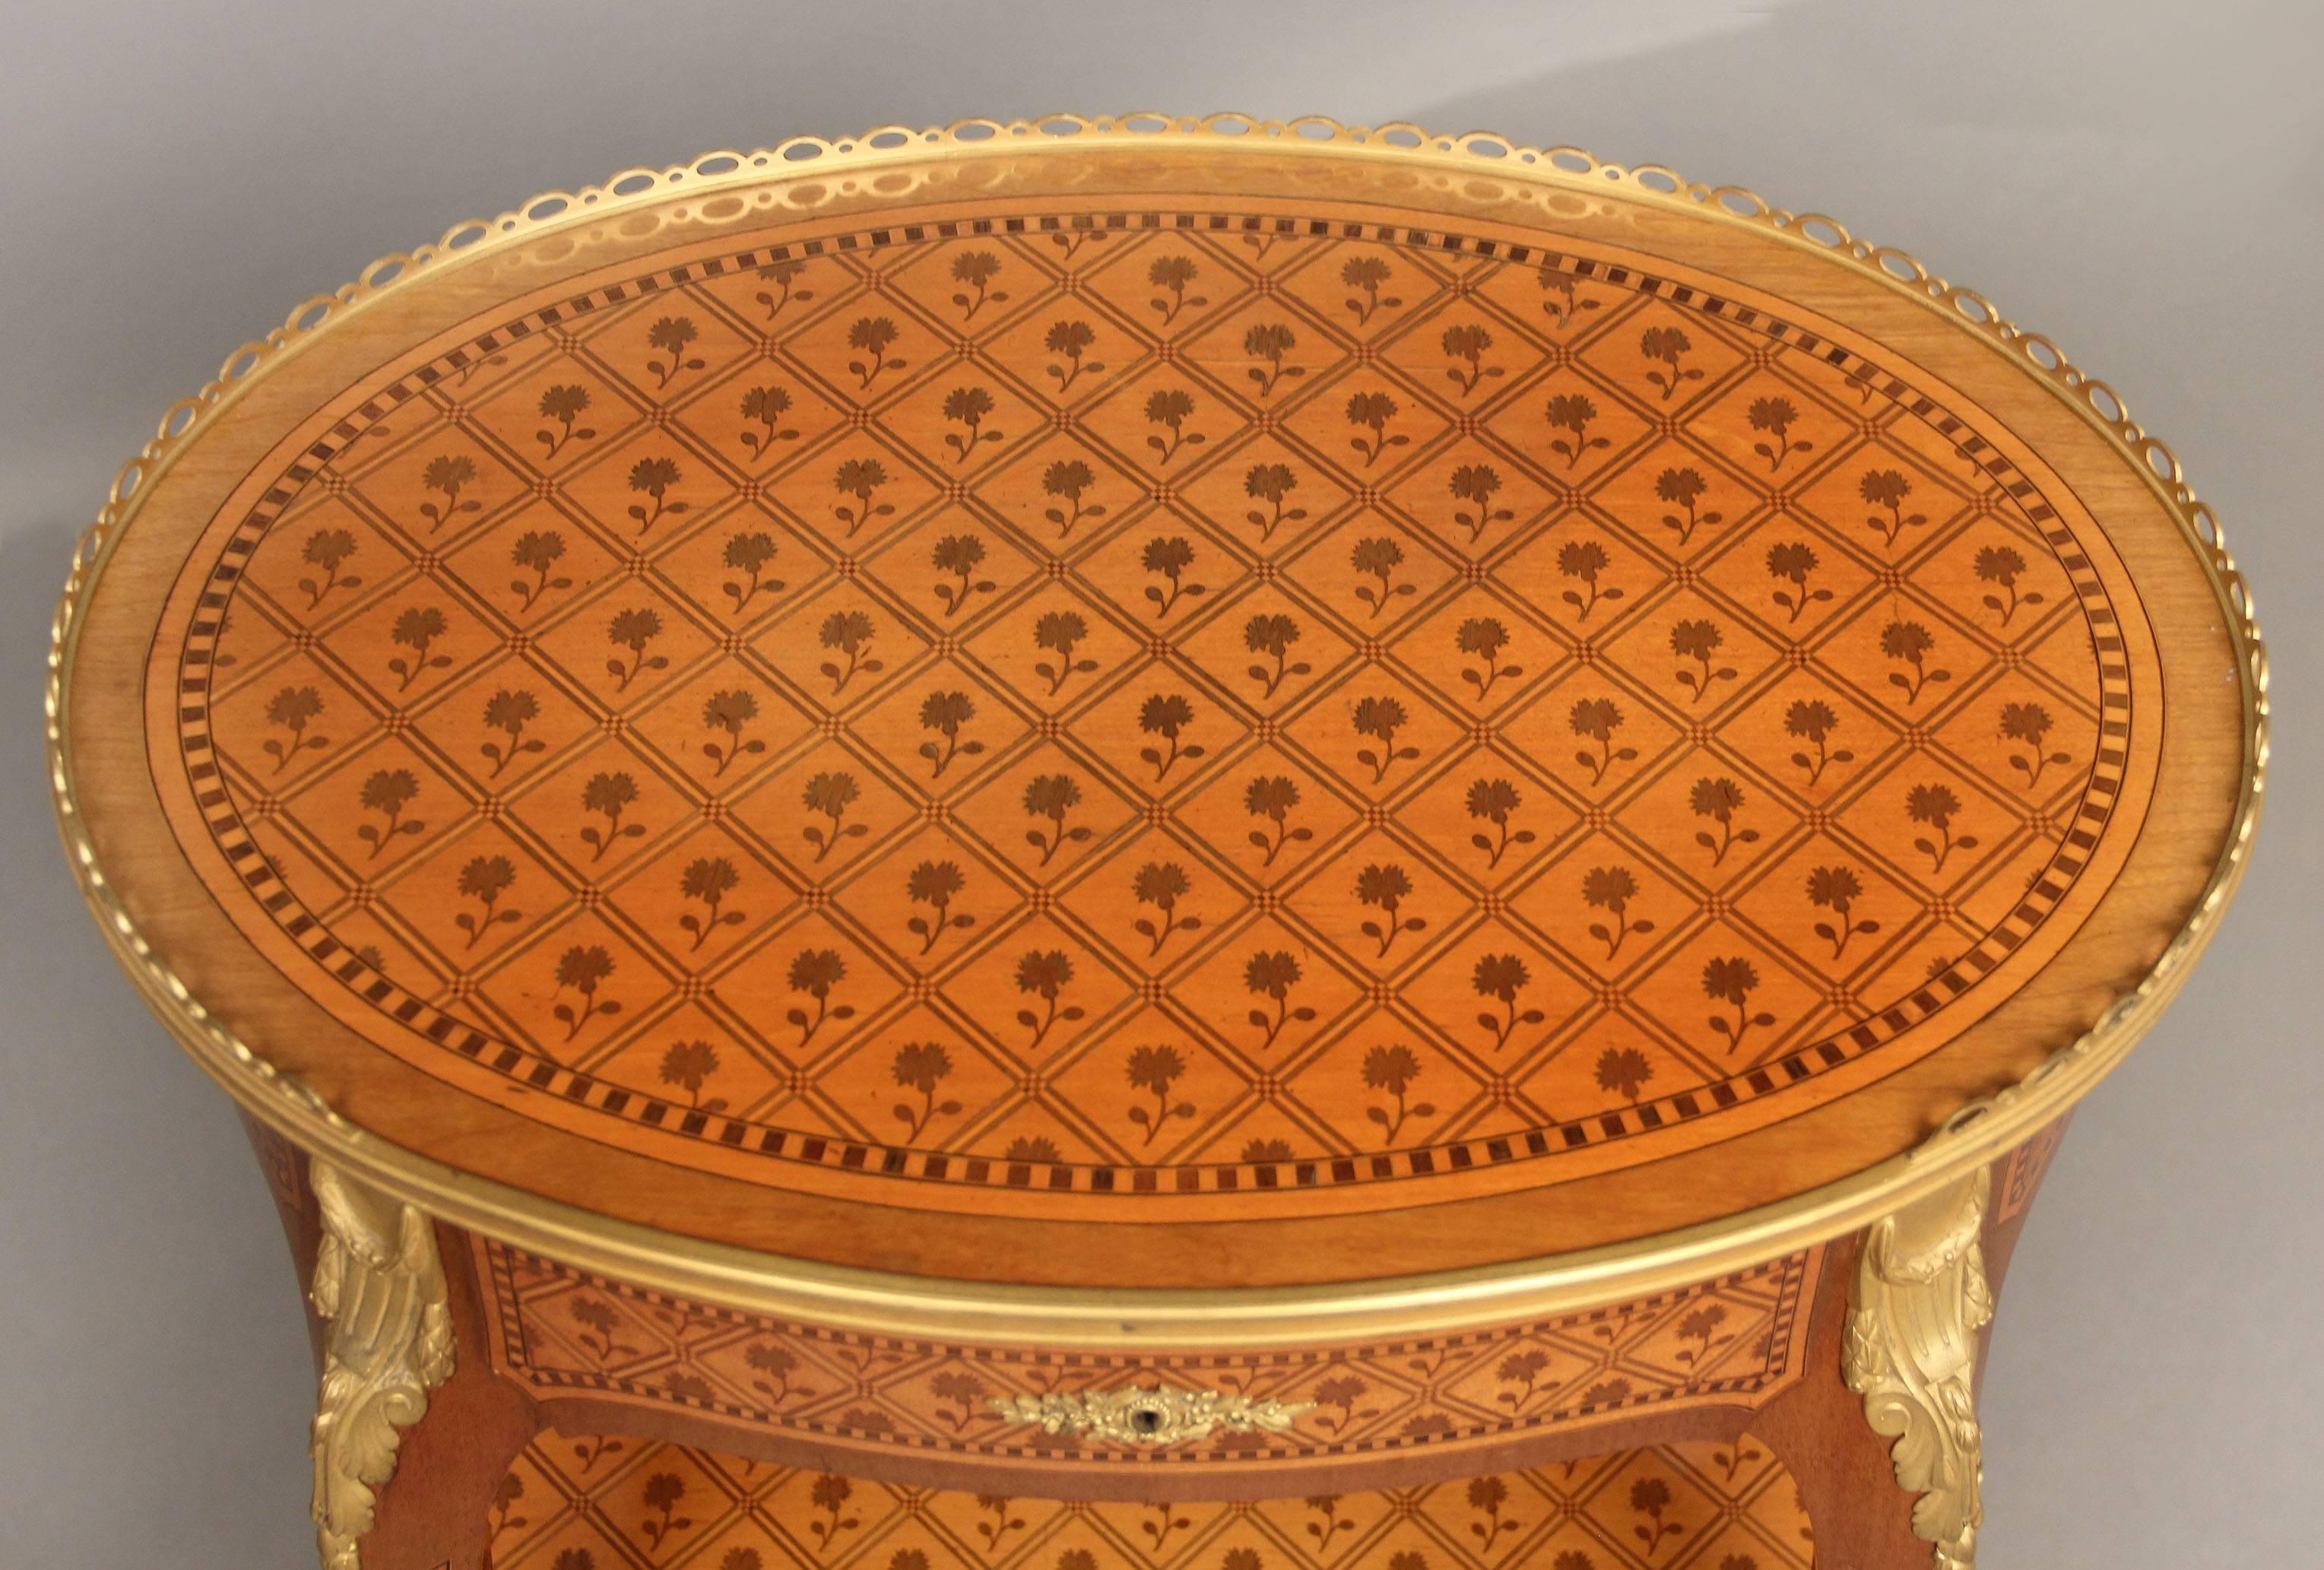 A beautiful late 19th century Louis XV style gilt bronze-mounted marquetry lamp table

The two-tier table with a pierced gallery inlaid floral marquetry top above a single drawer.